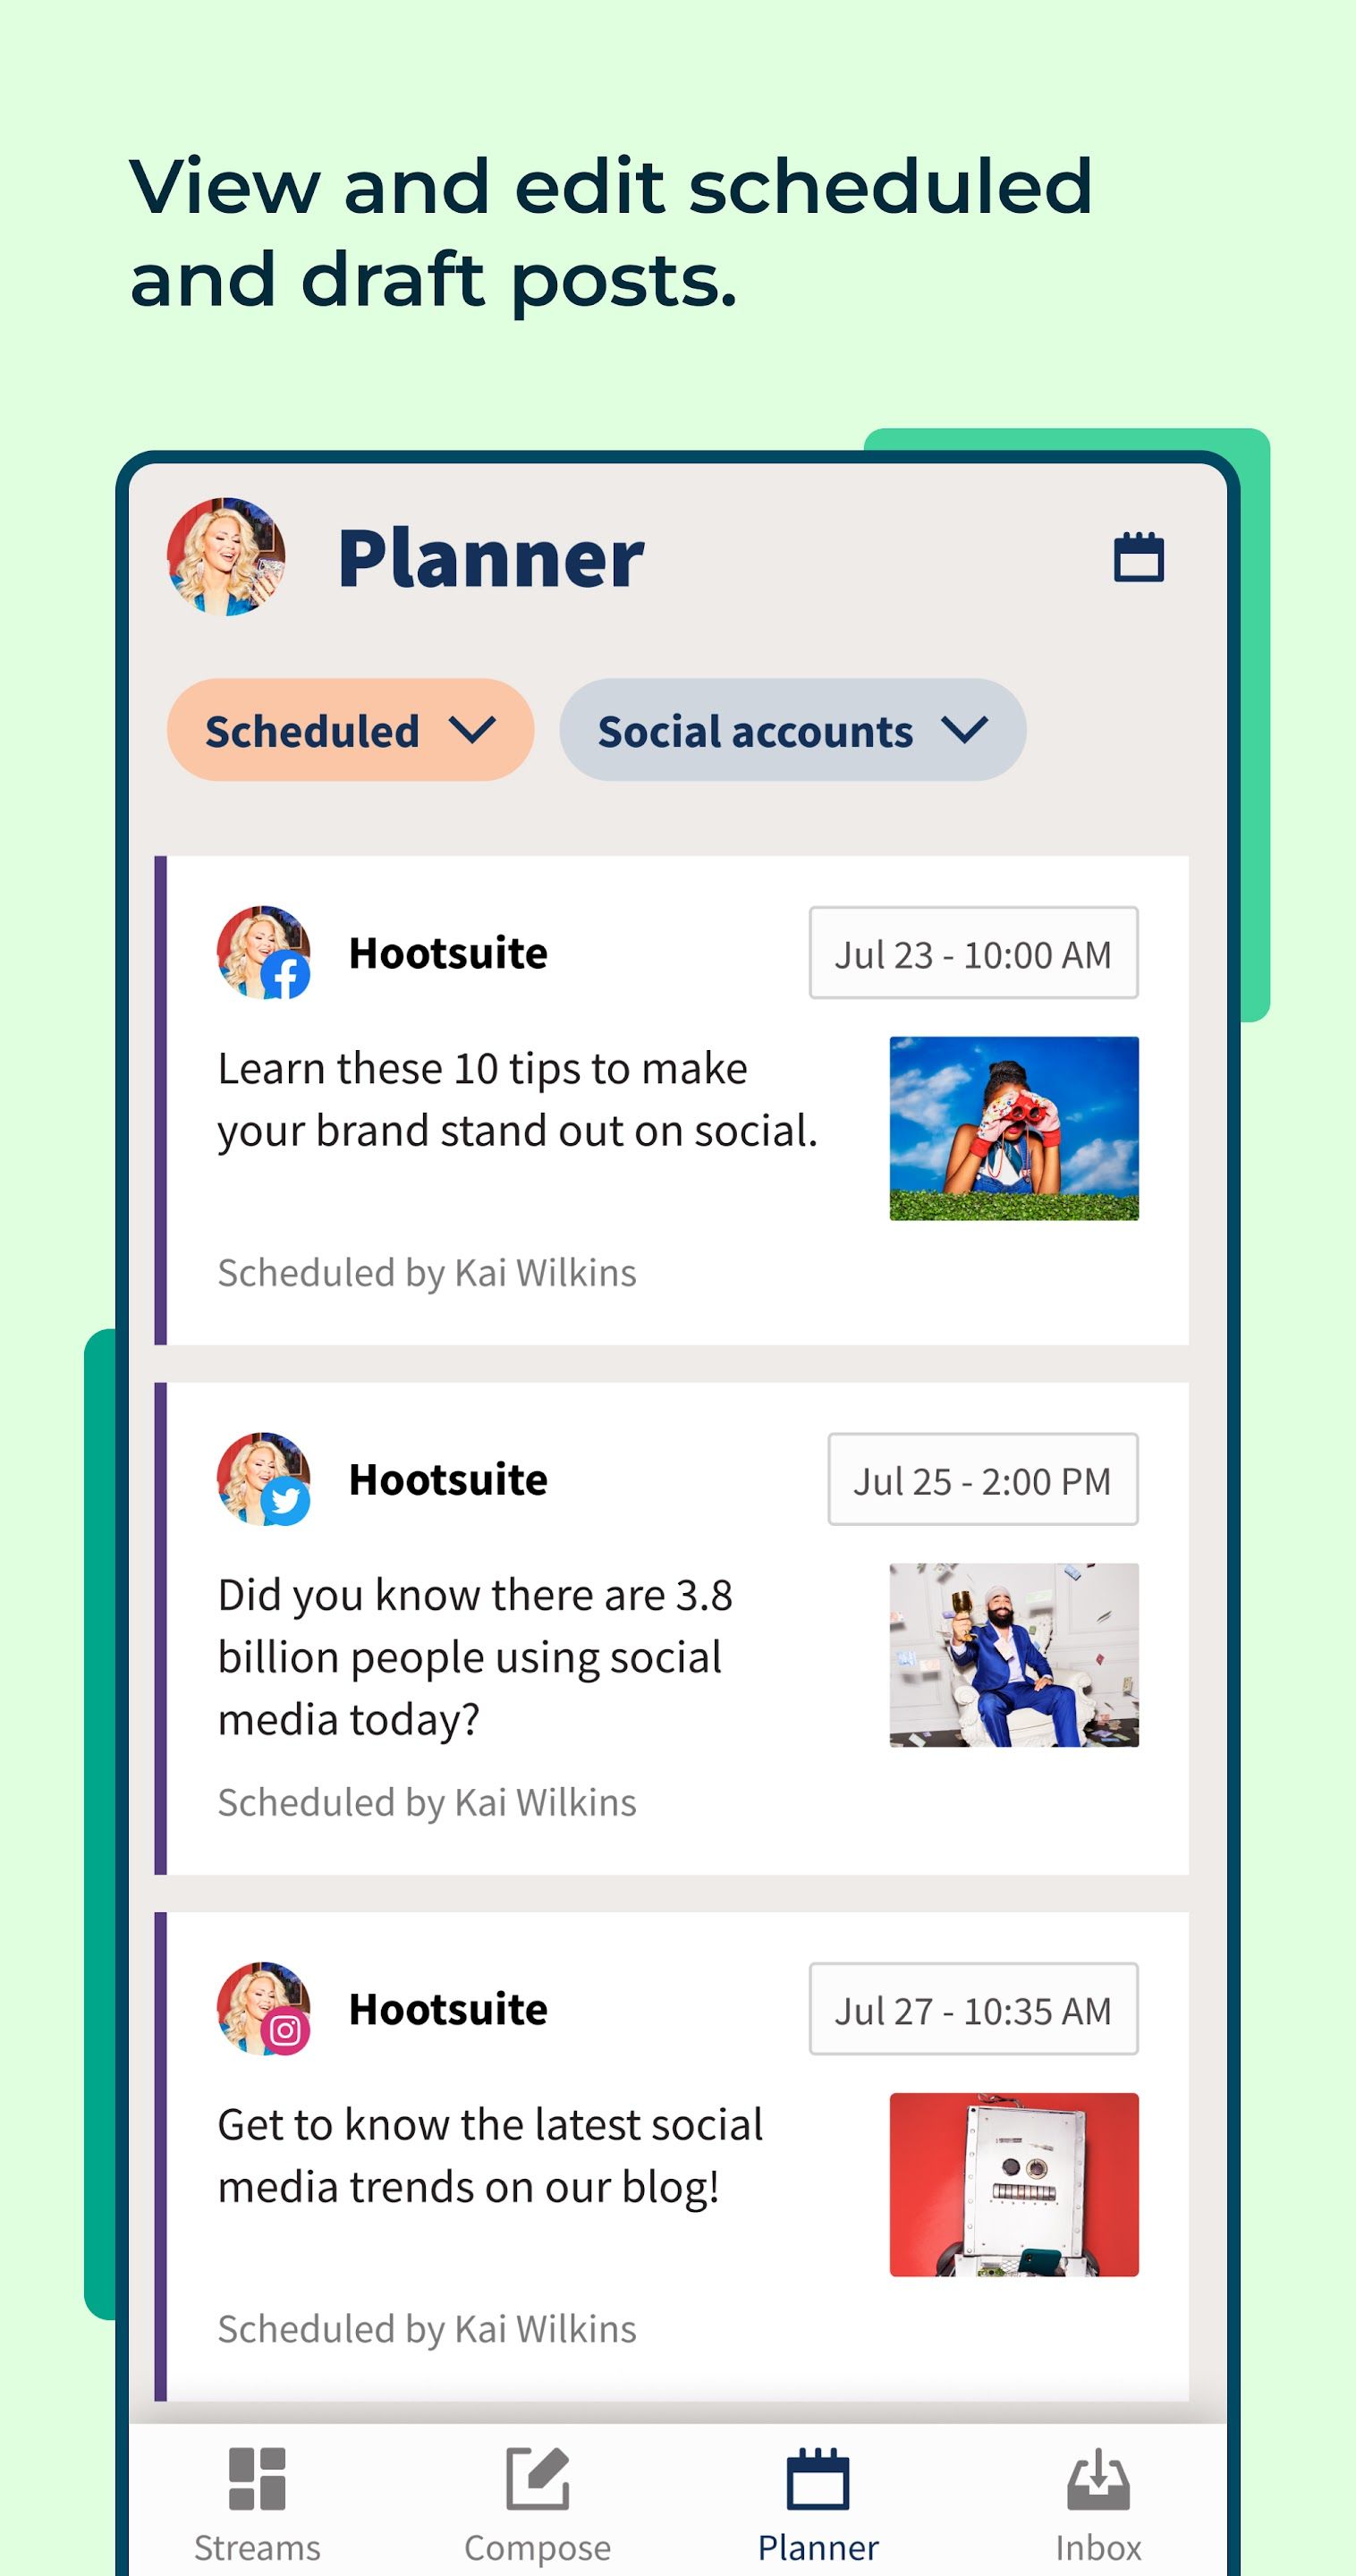 An app store listing screenshot for the Hootsuite Twitter app showing the option to schedule and draft posts